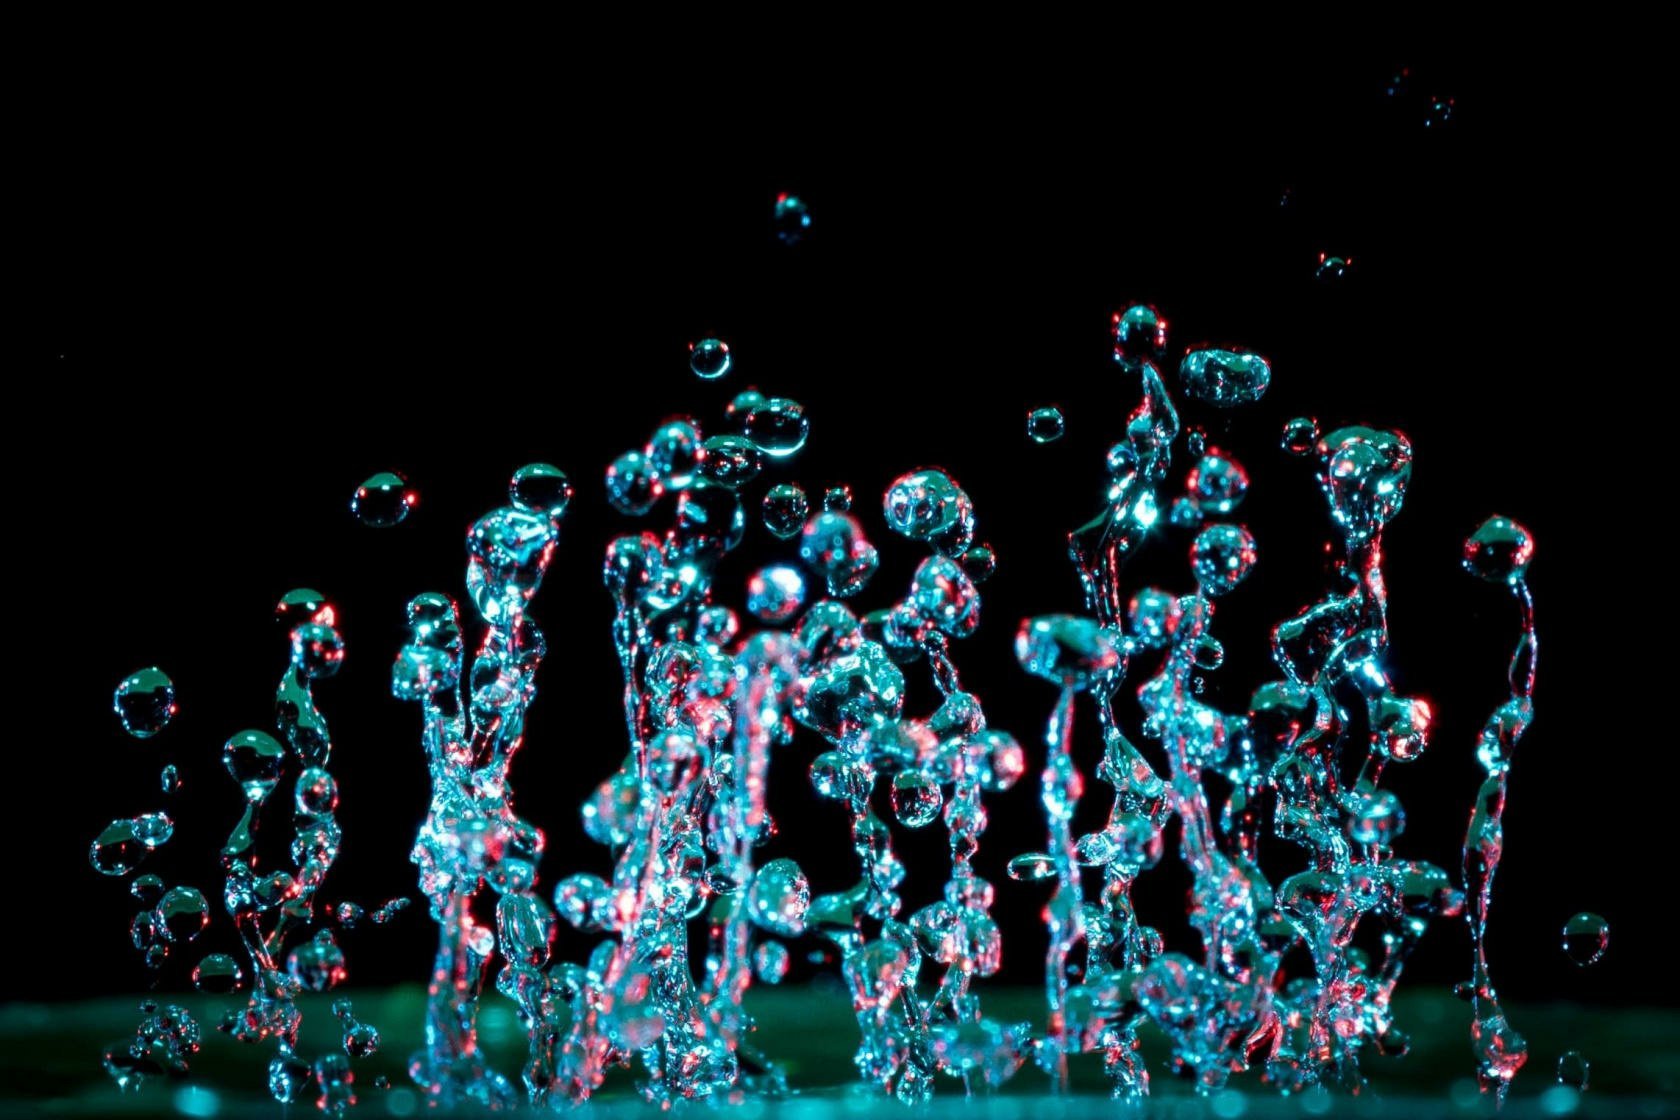 Water Drop Photography: from Idea to Results in Five Easy Steps